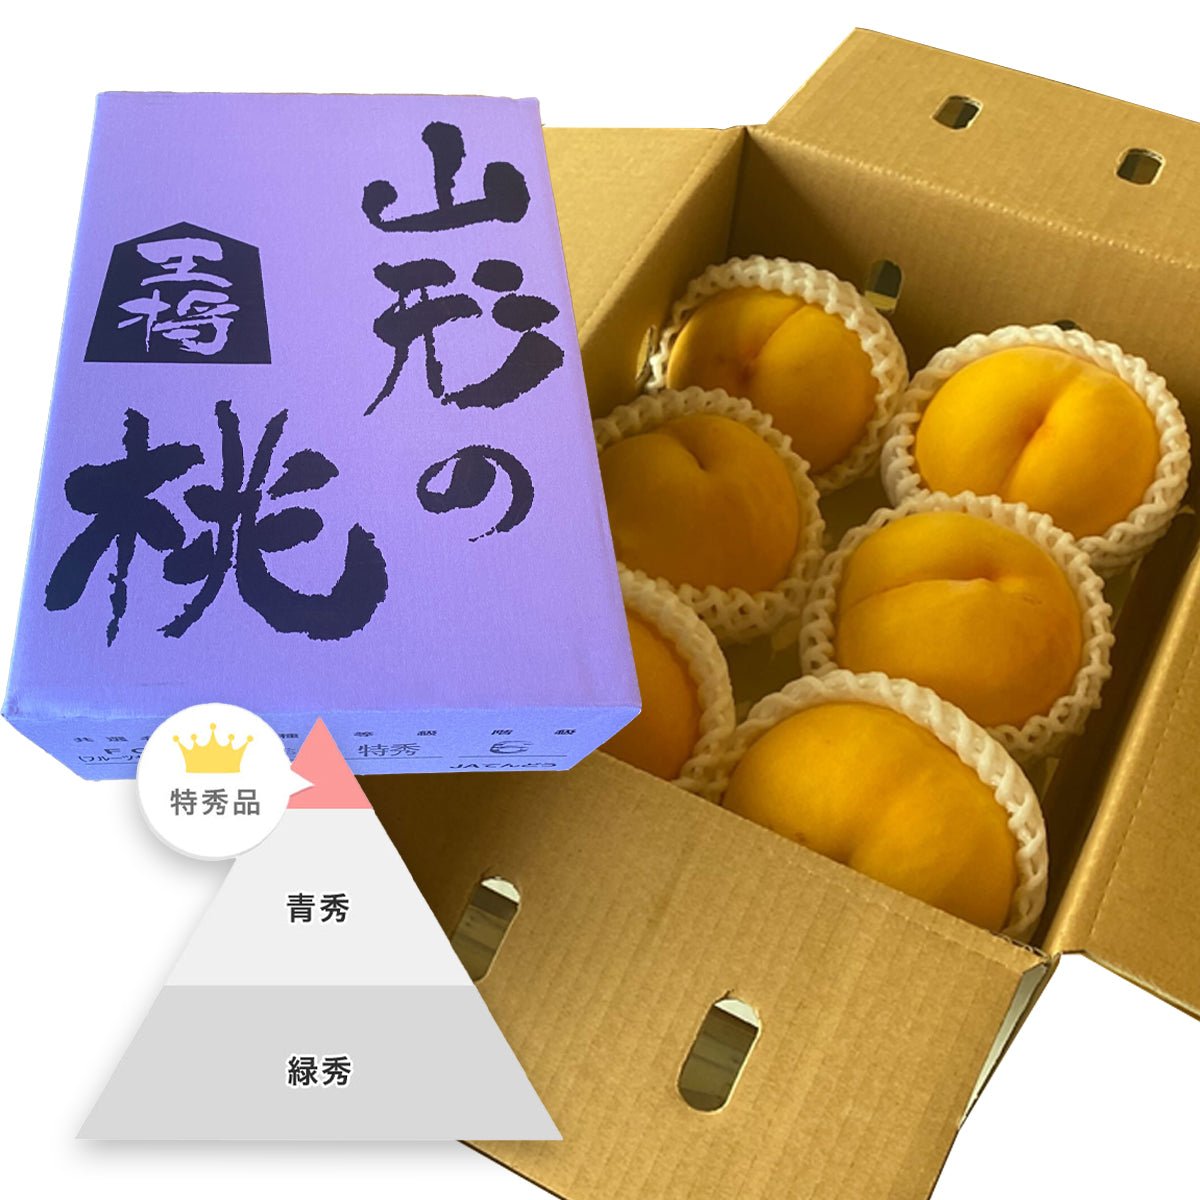 <Delivery on 25th-26th> Yamagata Golden Peach (黄金桃) - Tokyo Fresh Direct